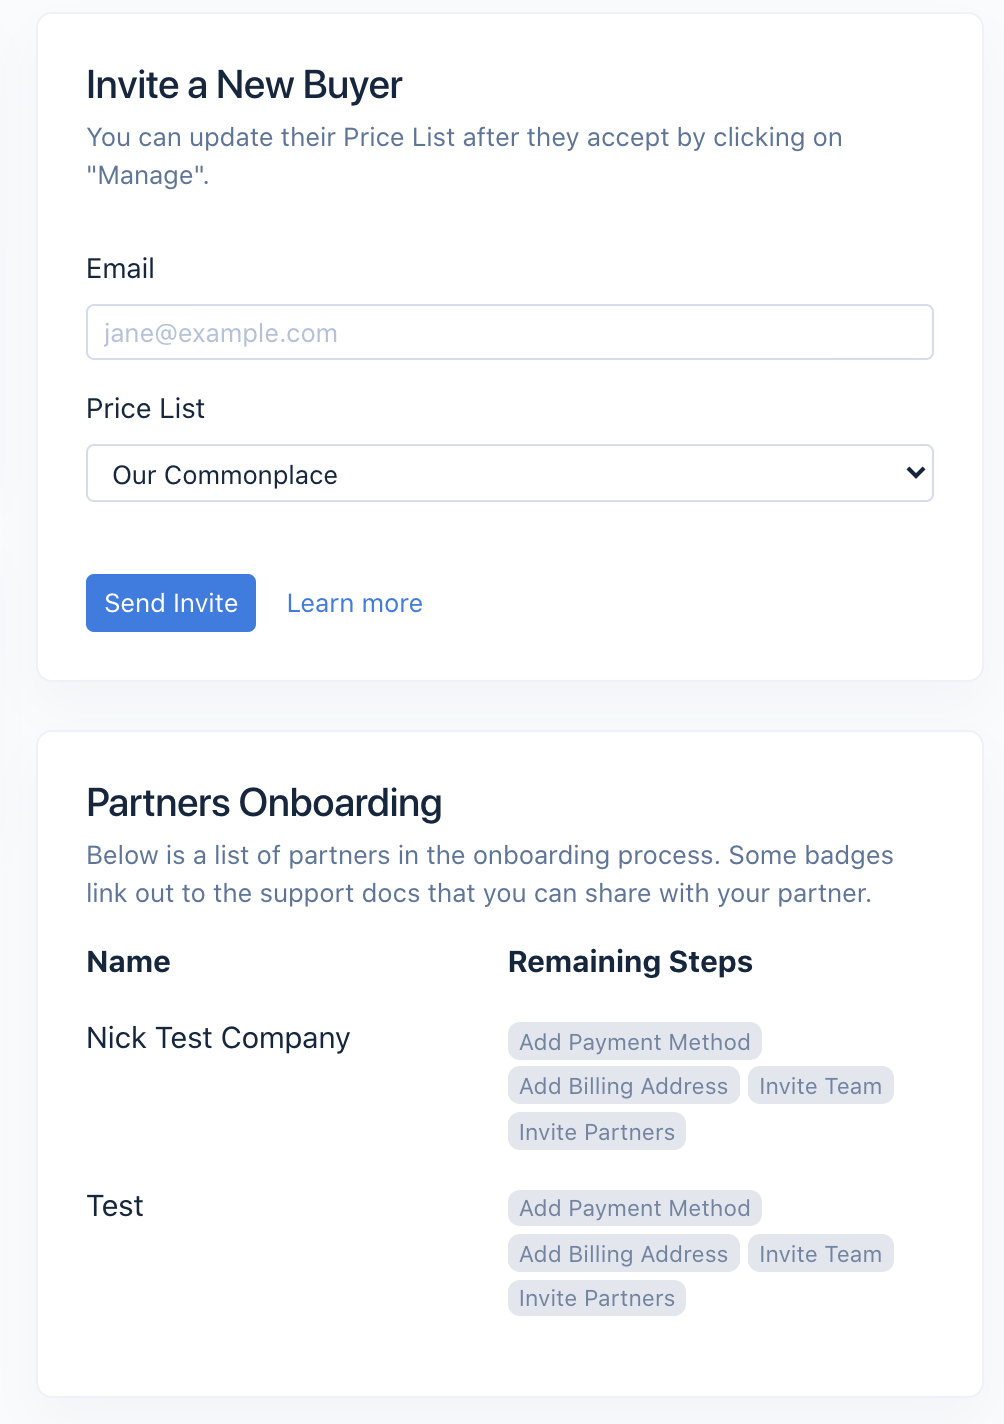 Invite partners to start trading with a single email. Track their progress through your onboarding funnel and keep everyone on track.